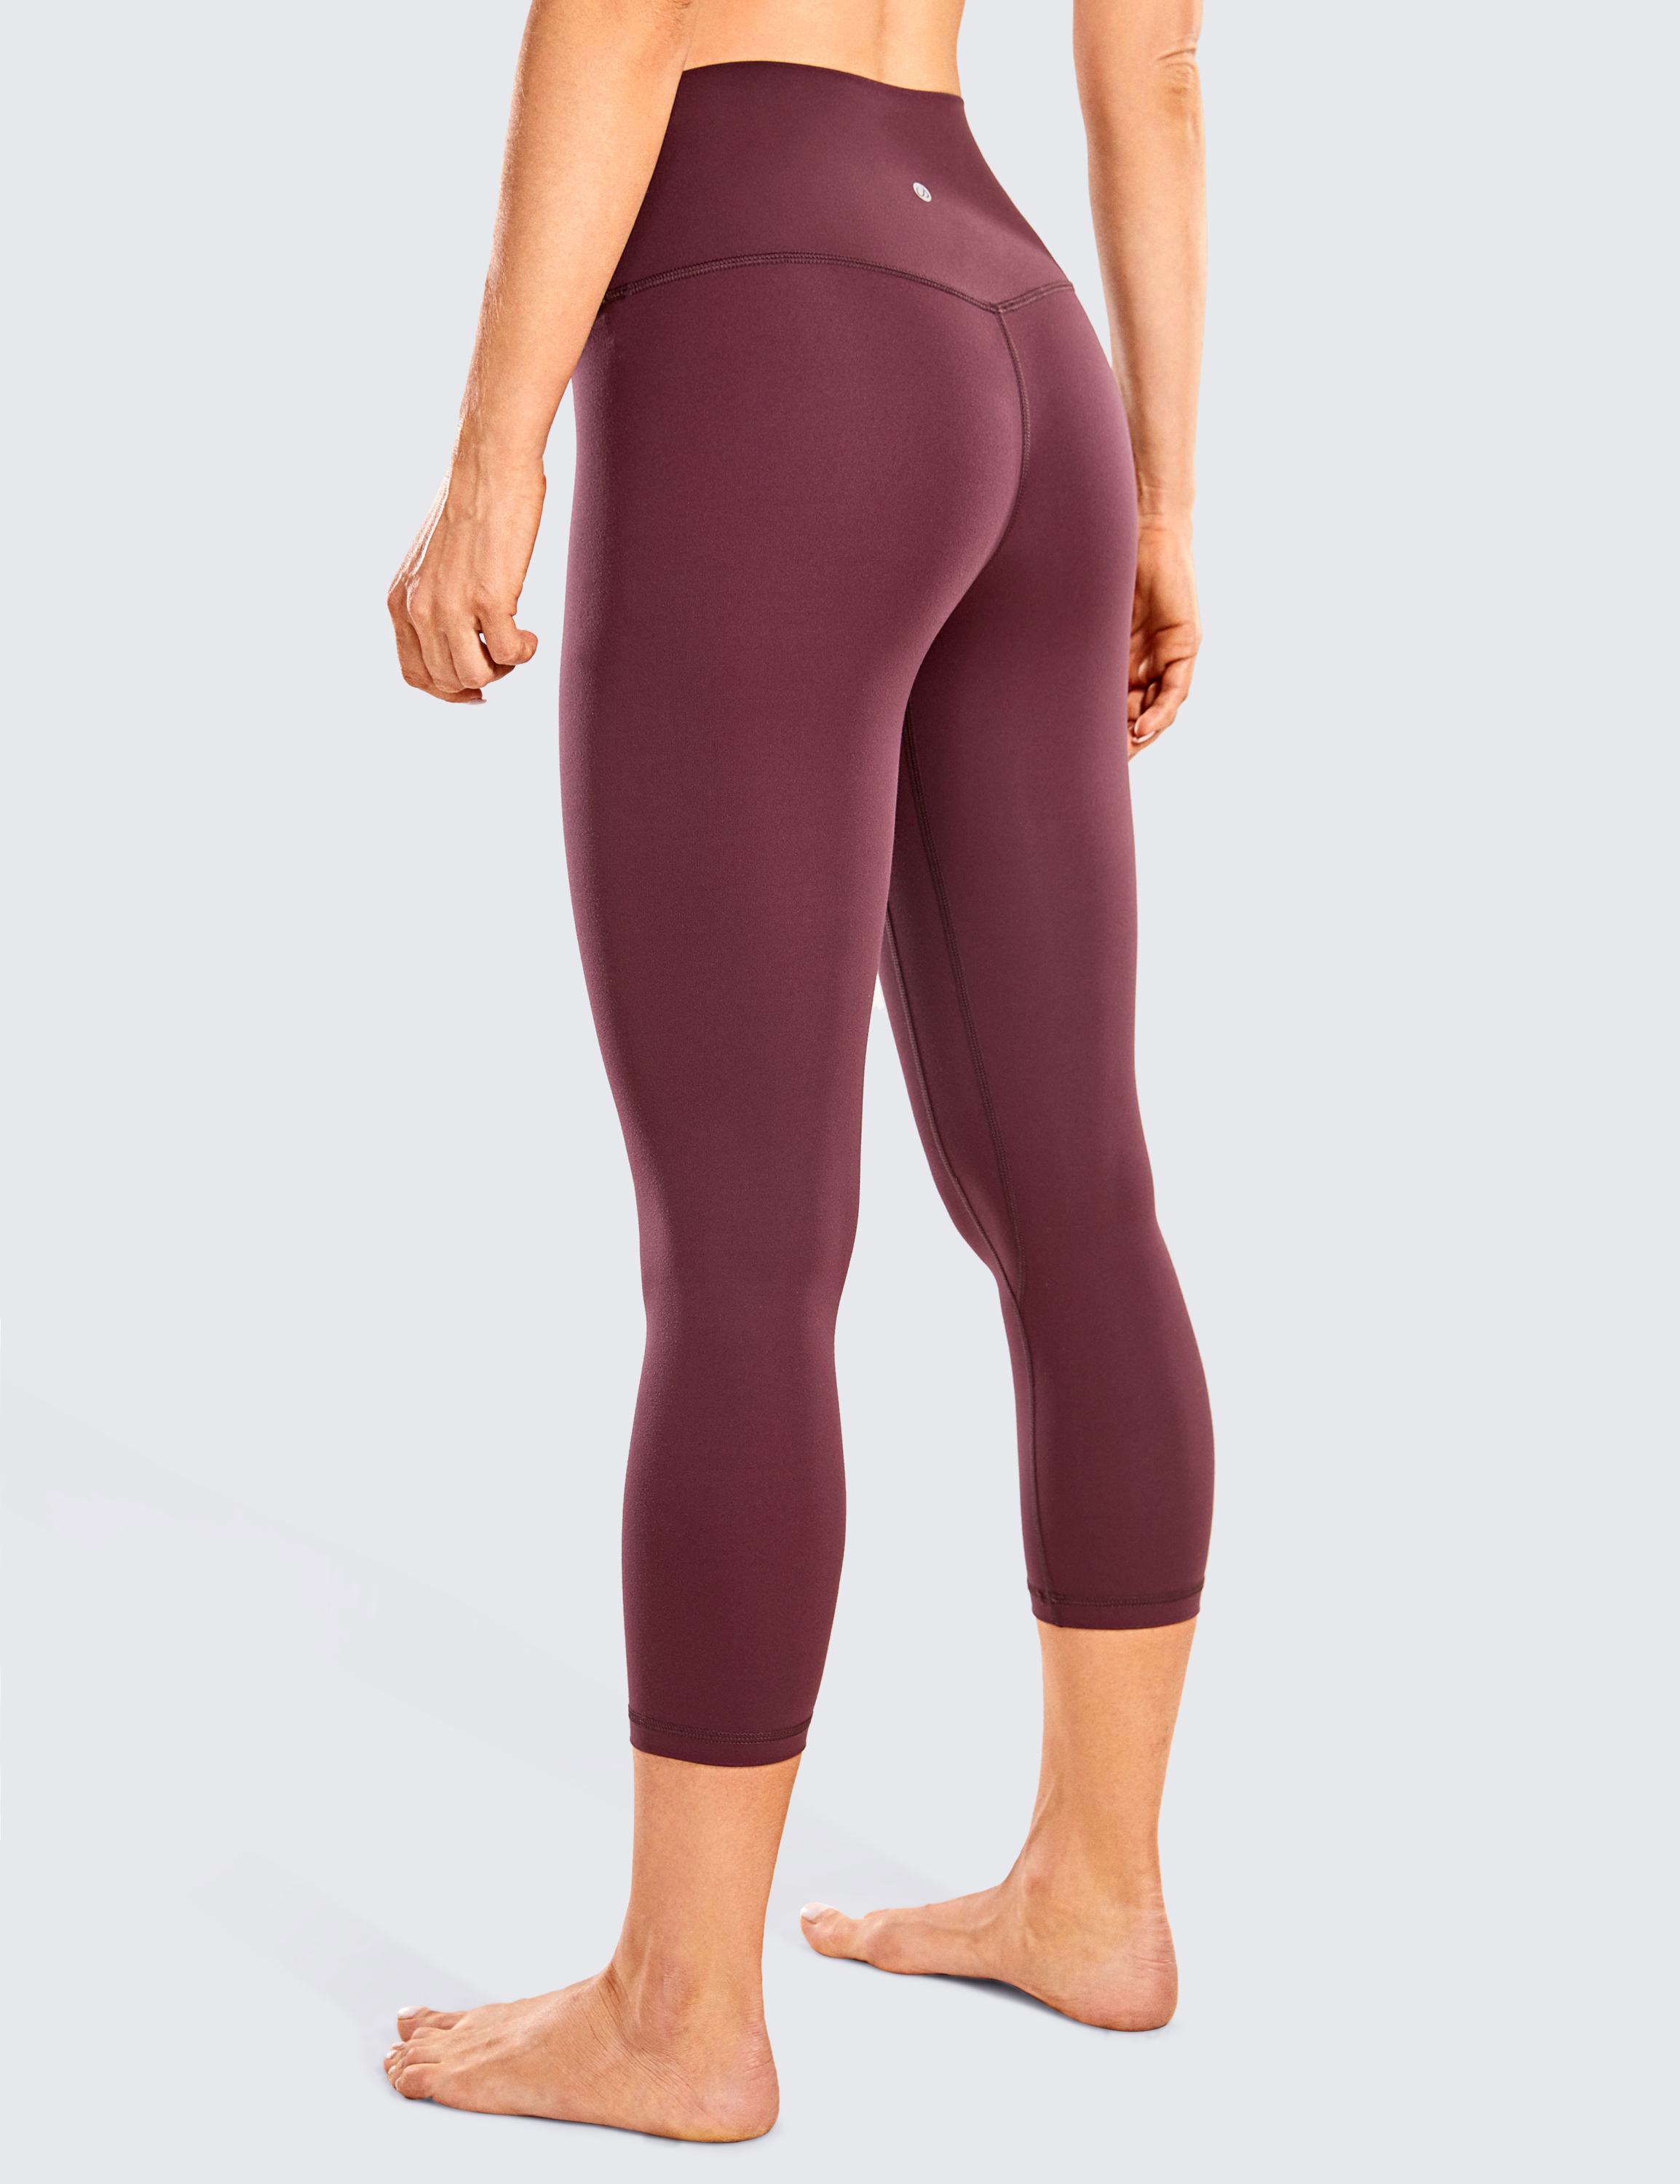 Naked Feel Loose Fit Sport Yoga Pants Workout Joggers Women